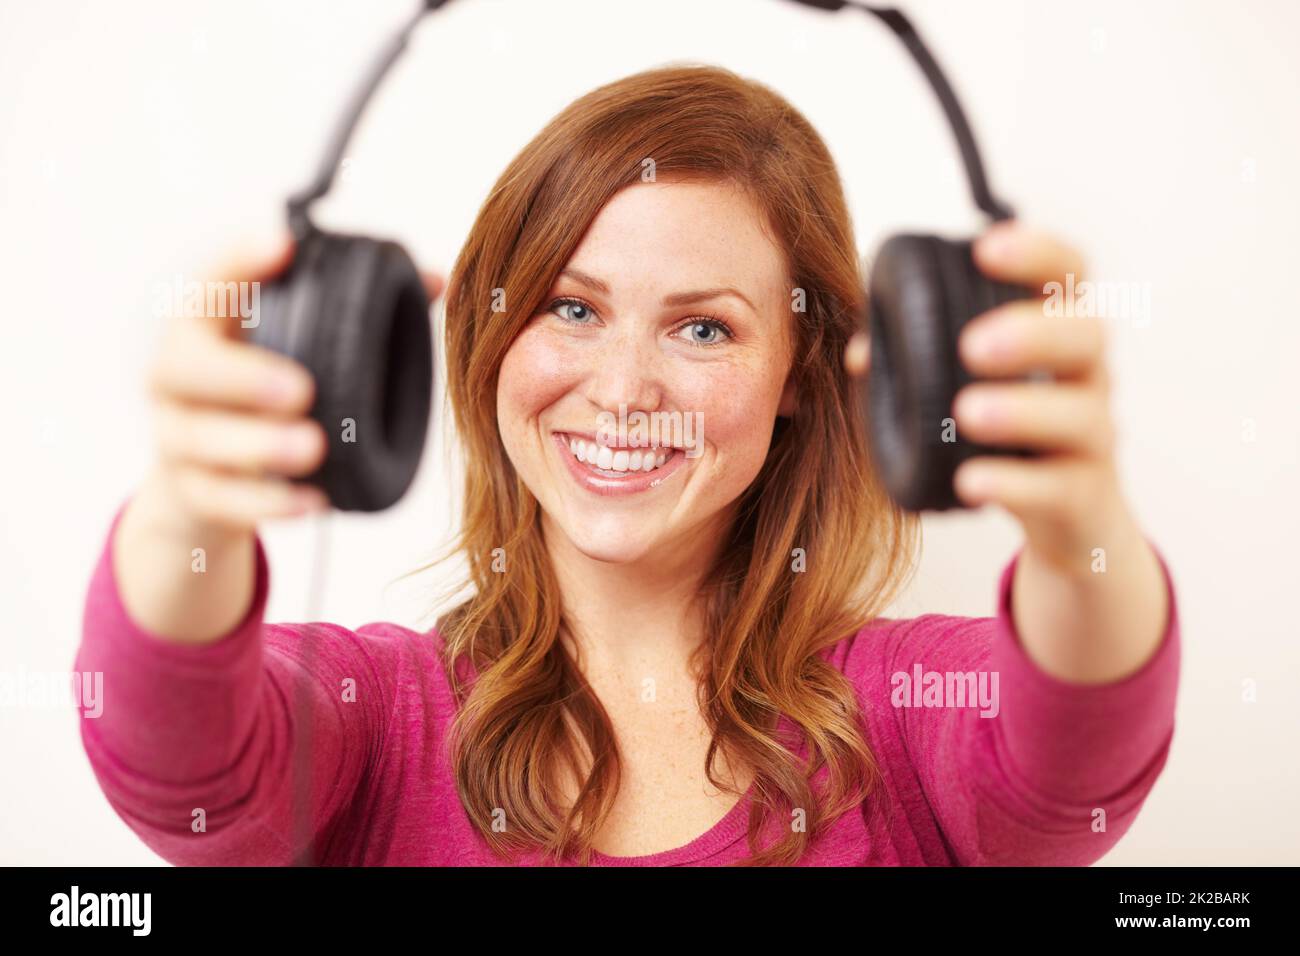 Hear, have a listen to this. Portrait of an attractive young woman offering you a pair of headphones. Stock Photo